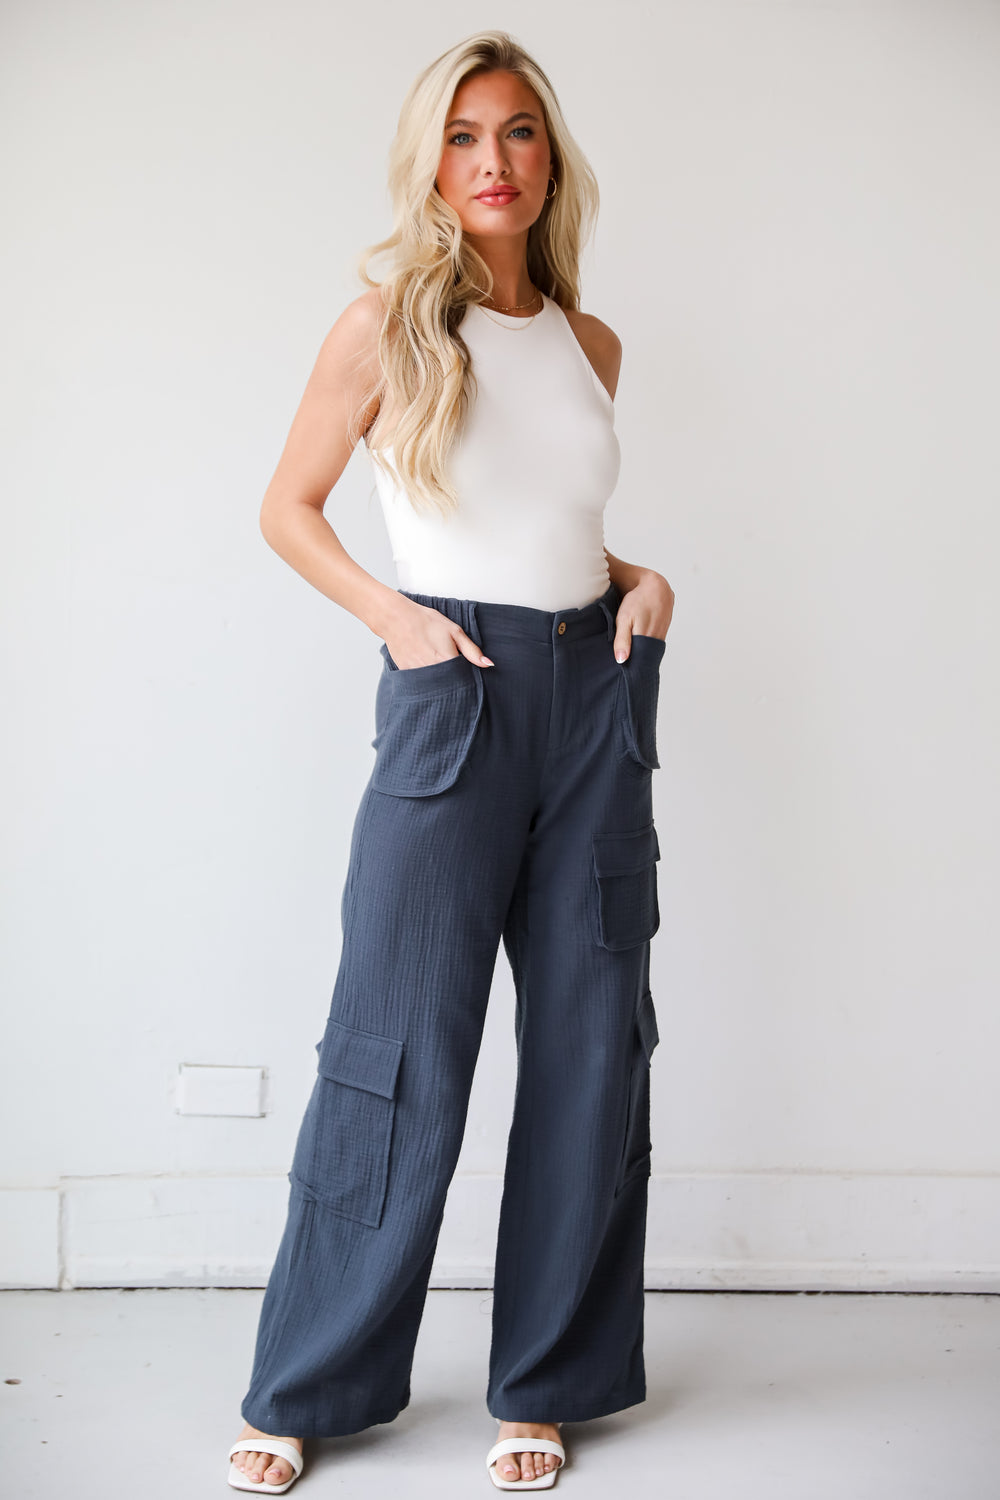 Trendsetting Impact Charcoal Linen Cargo Pants. High waisted cargo pants for spring. casual pants for women. wide leg pants. boutique